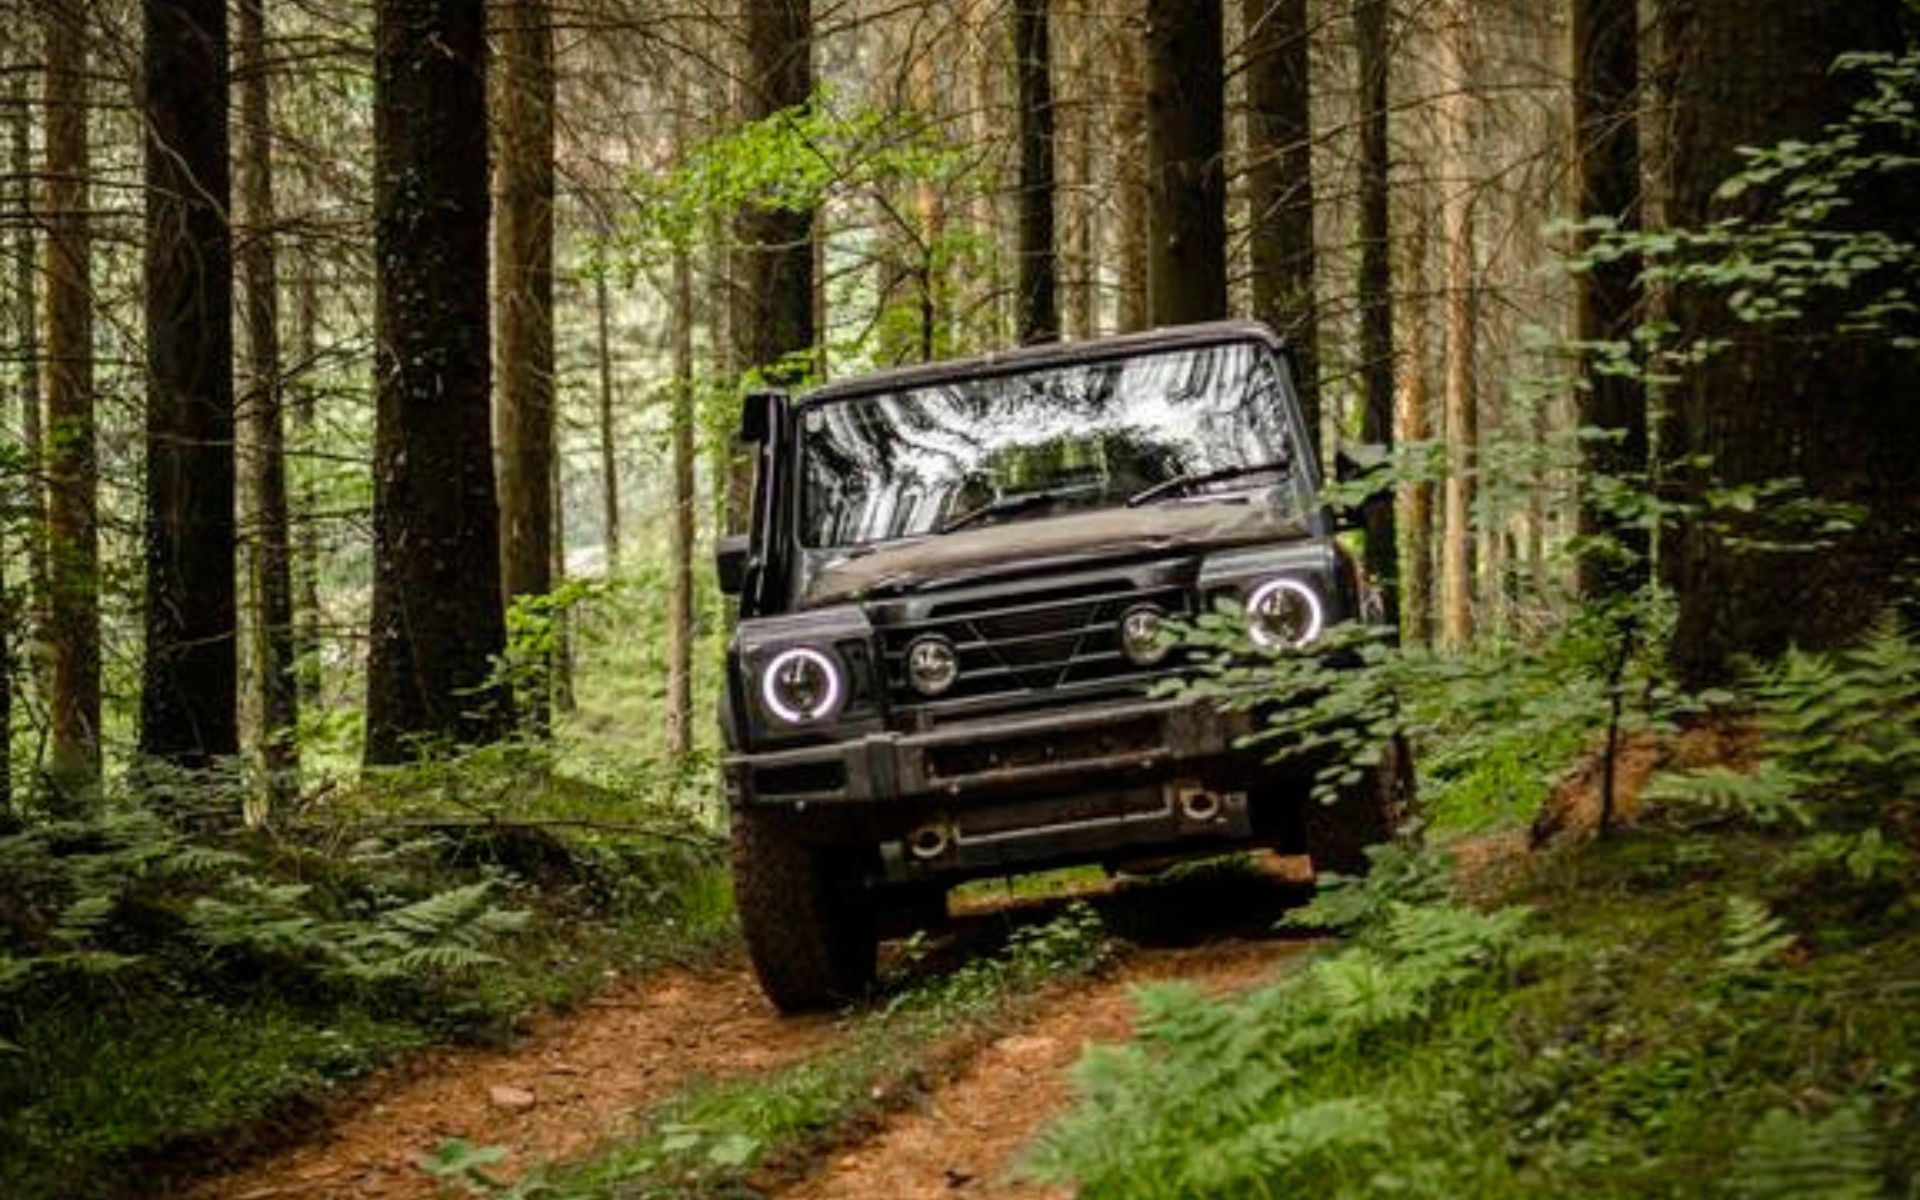 The INEOS Grenadier 4X4: Built for Off-Road Excellence